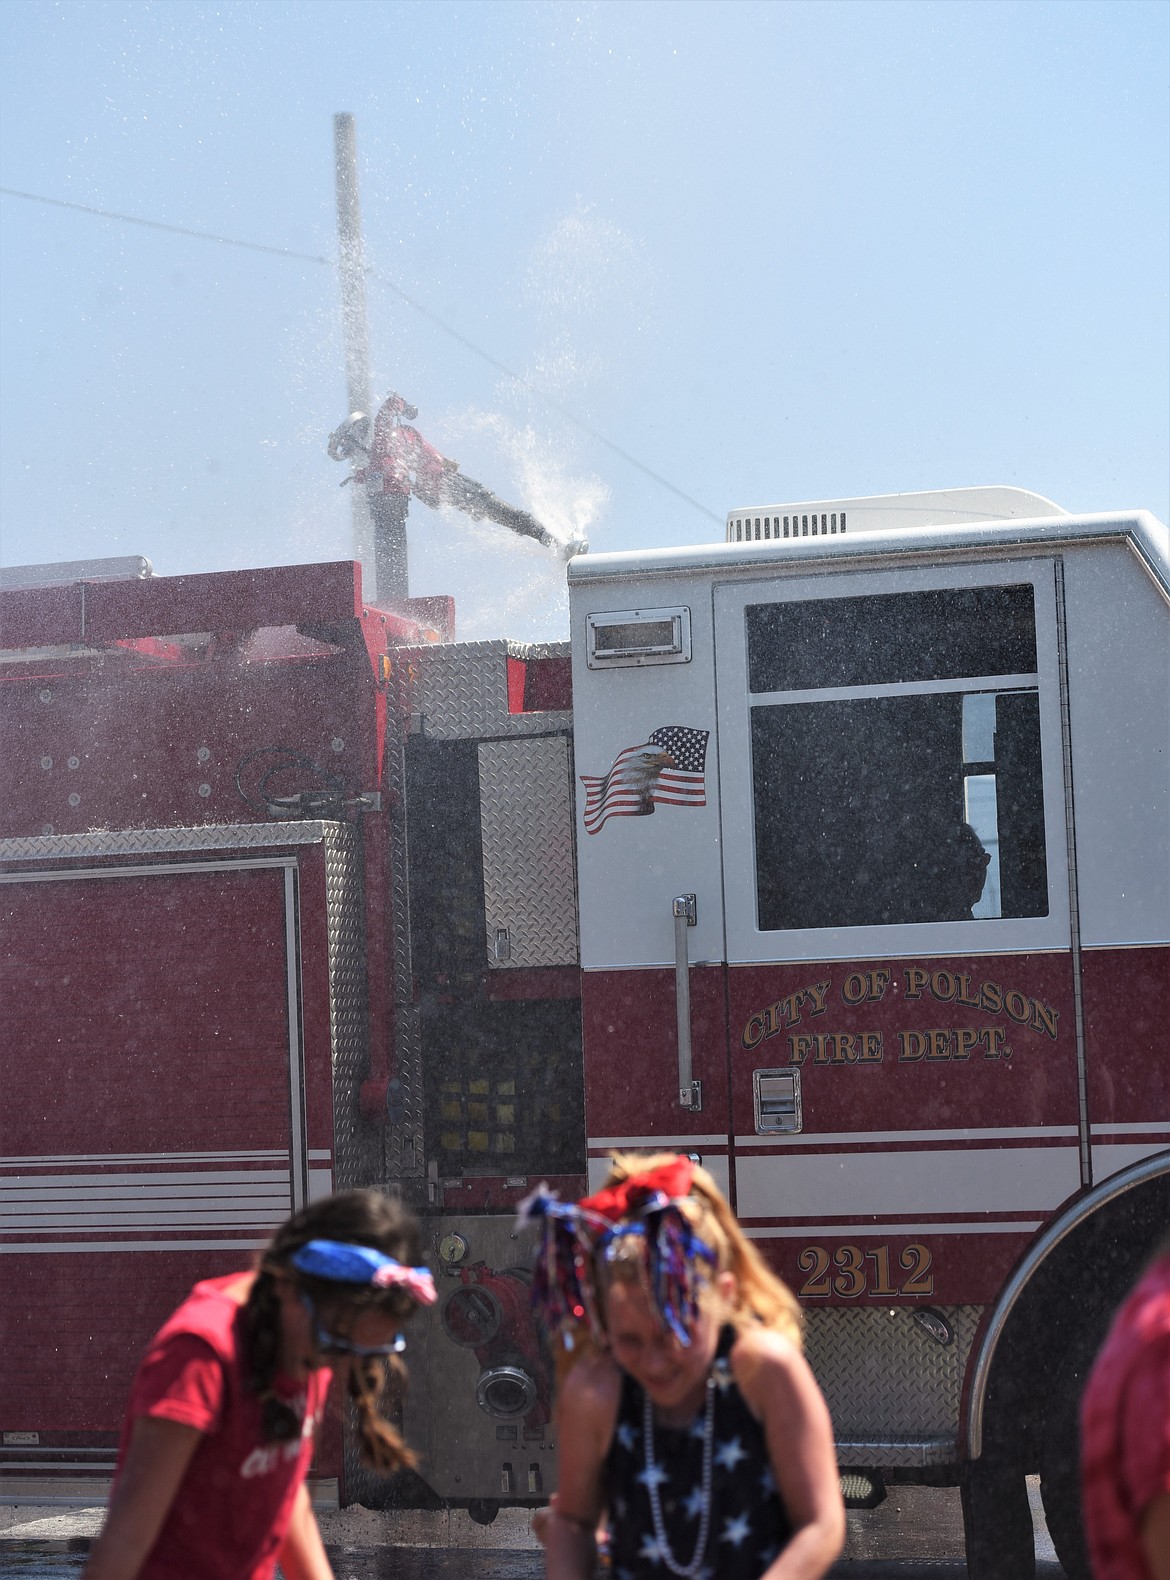 The Polson Fire Department cools off the crowd with a spray of water. (Scot Heisel/Lake County Leader)